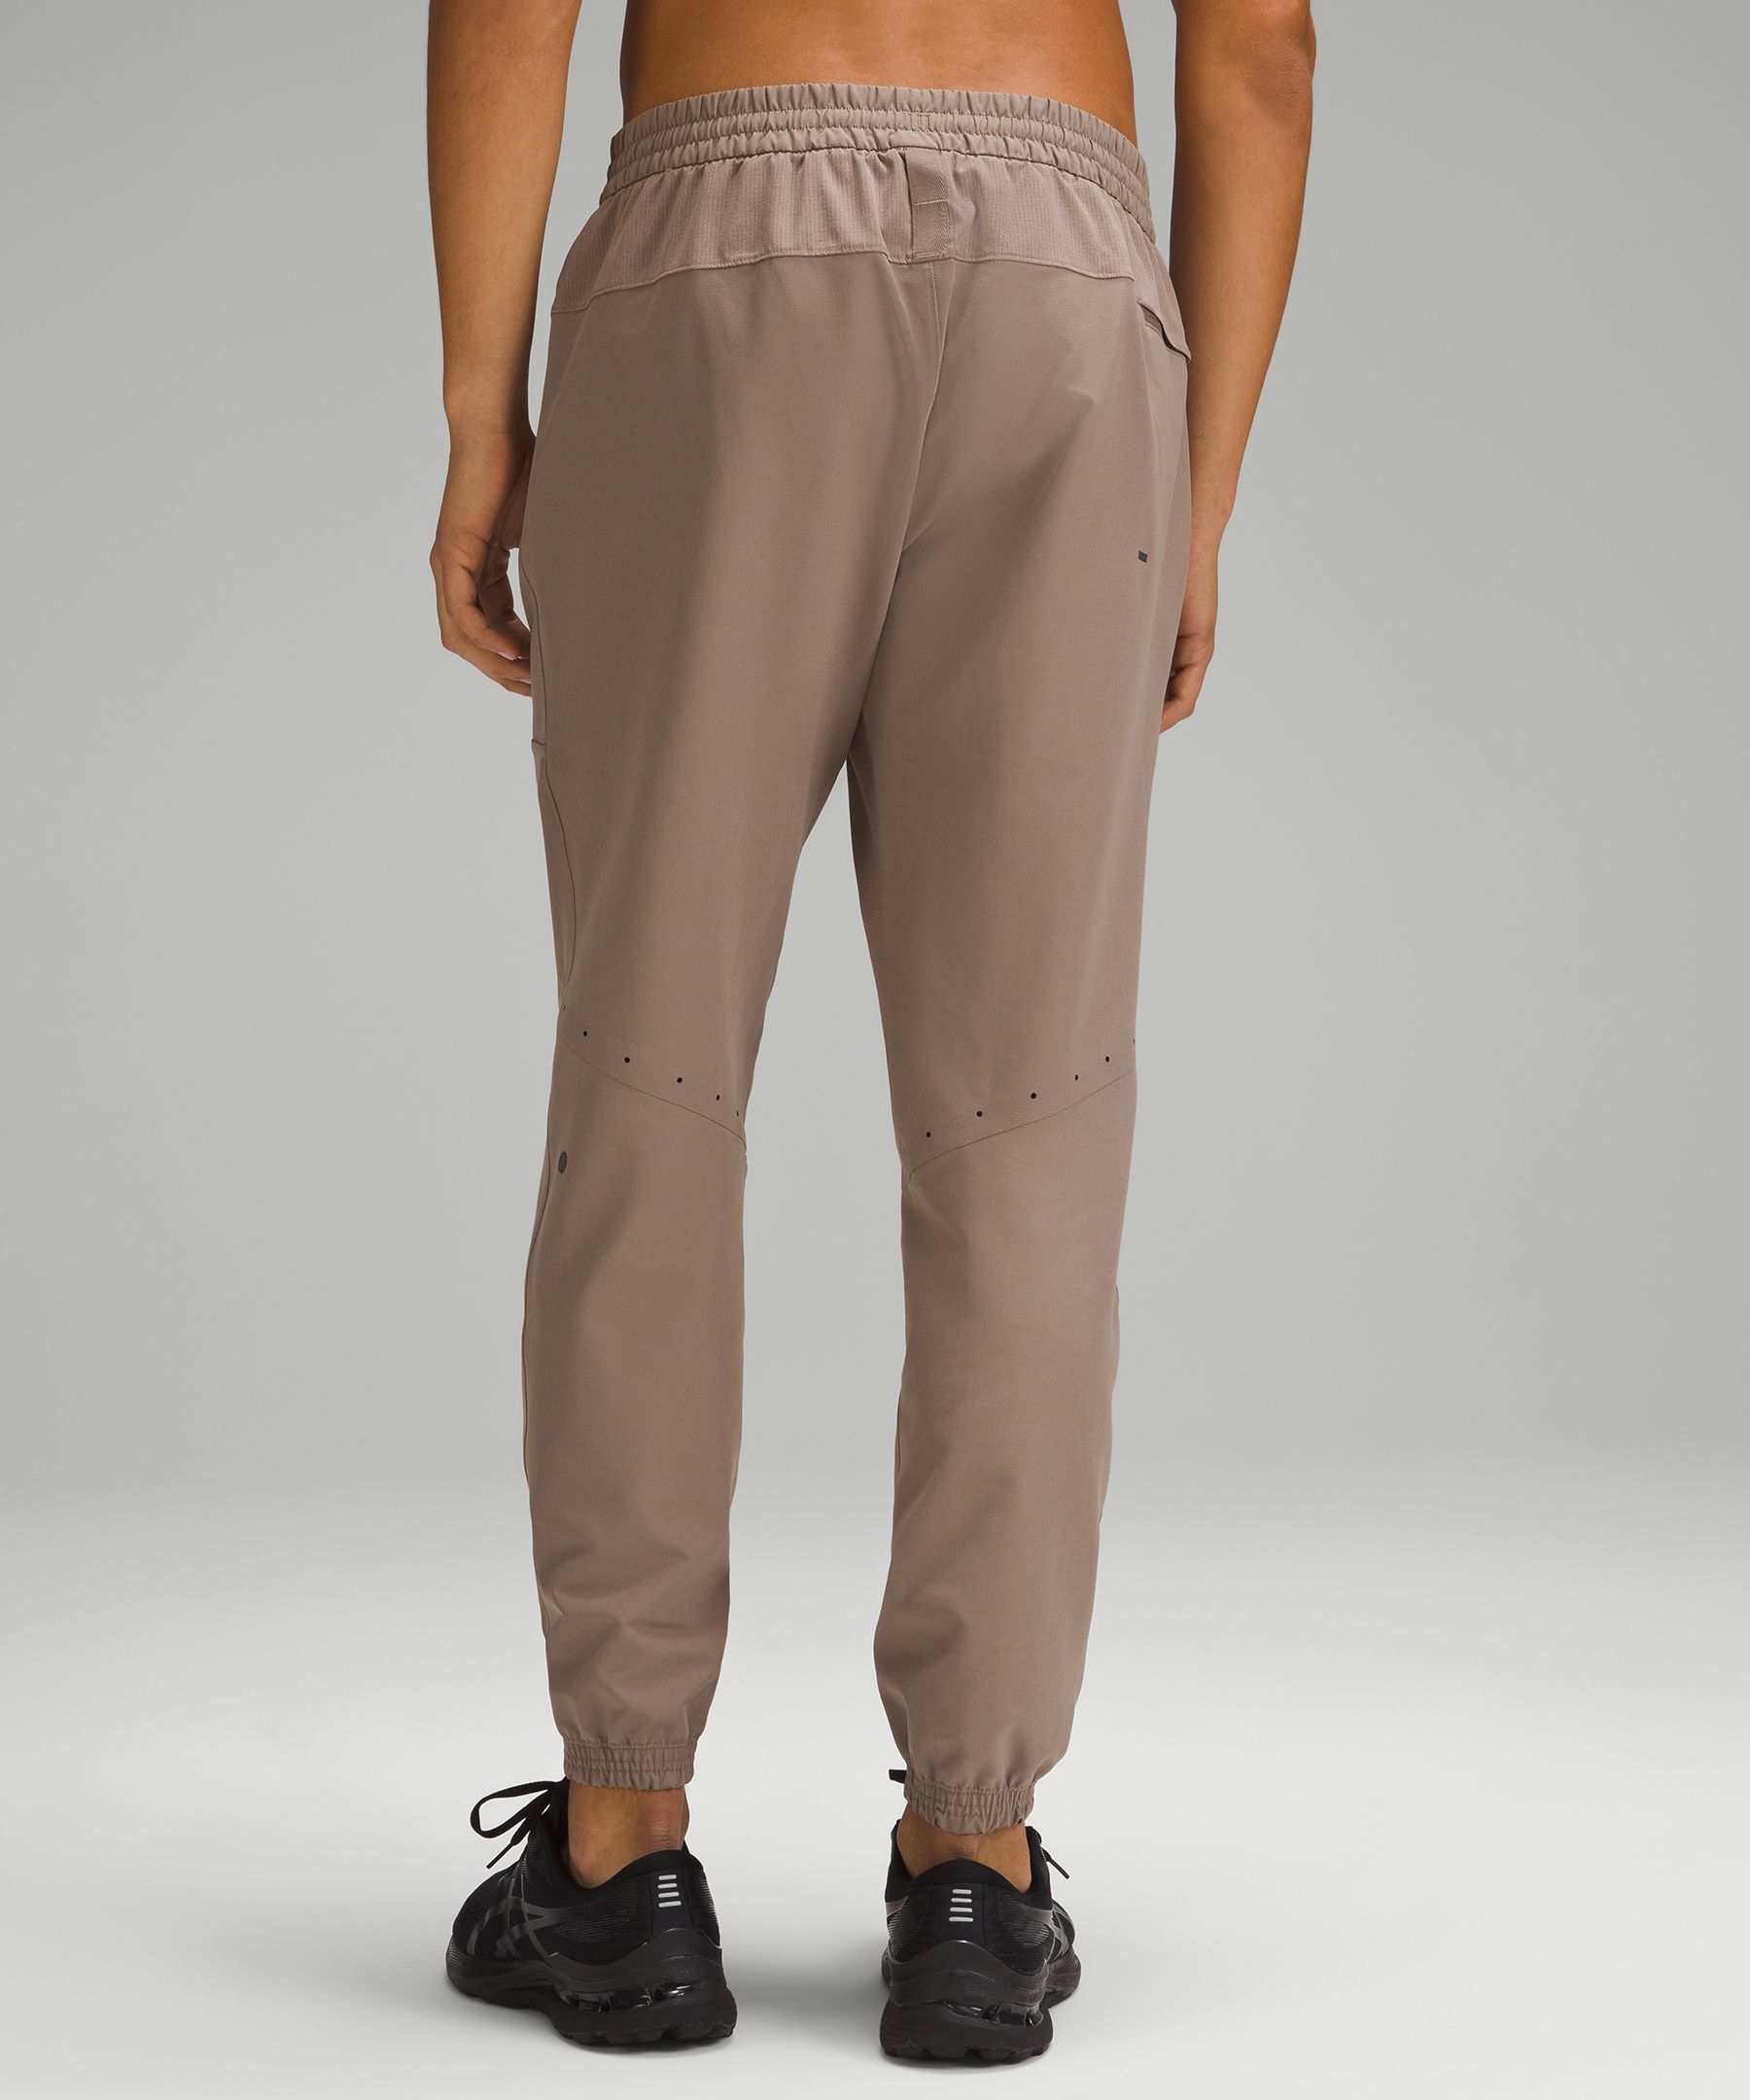 Lululemon License To Train Pant Online Store - Green Twill Mens